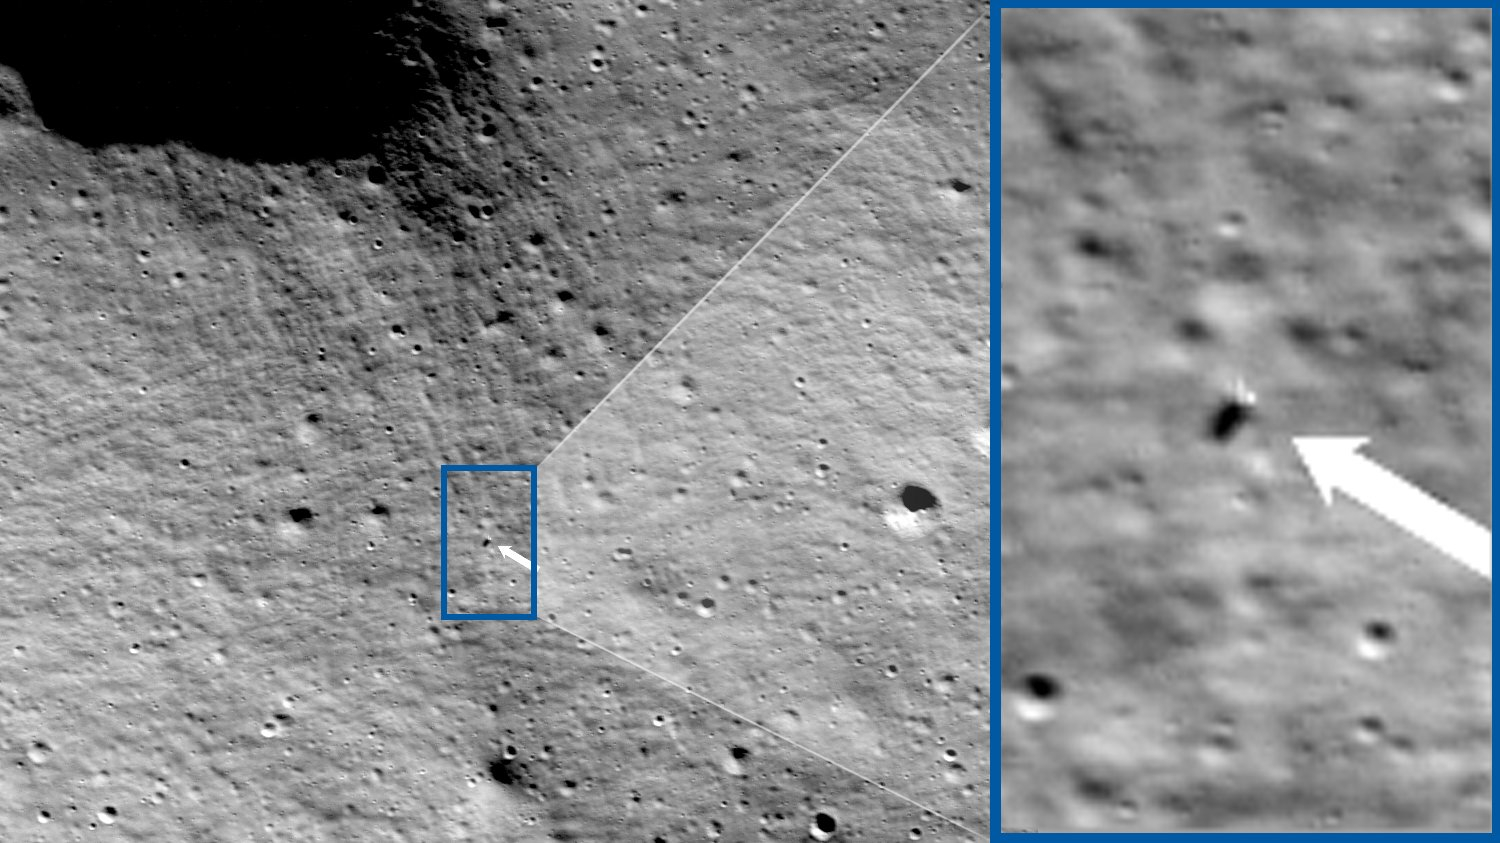 Intuitive Machines’ Odysseus moon lander beams home 1st photos from lunar surface Space